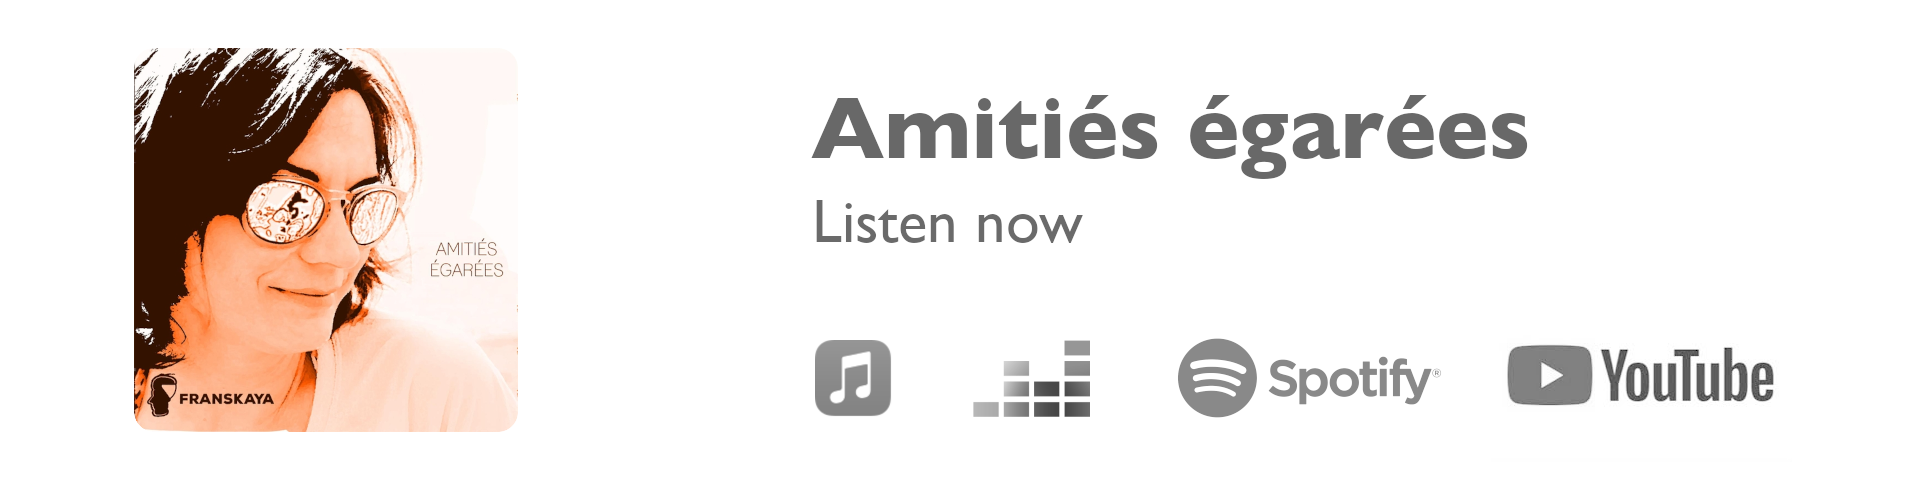 Clic to play Amitiés Égarées in the streaming platform of your choice